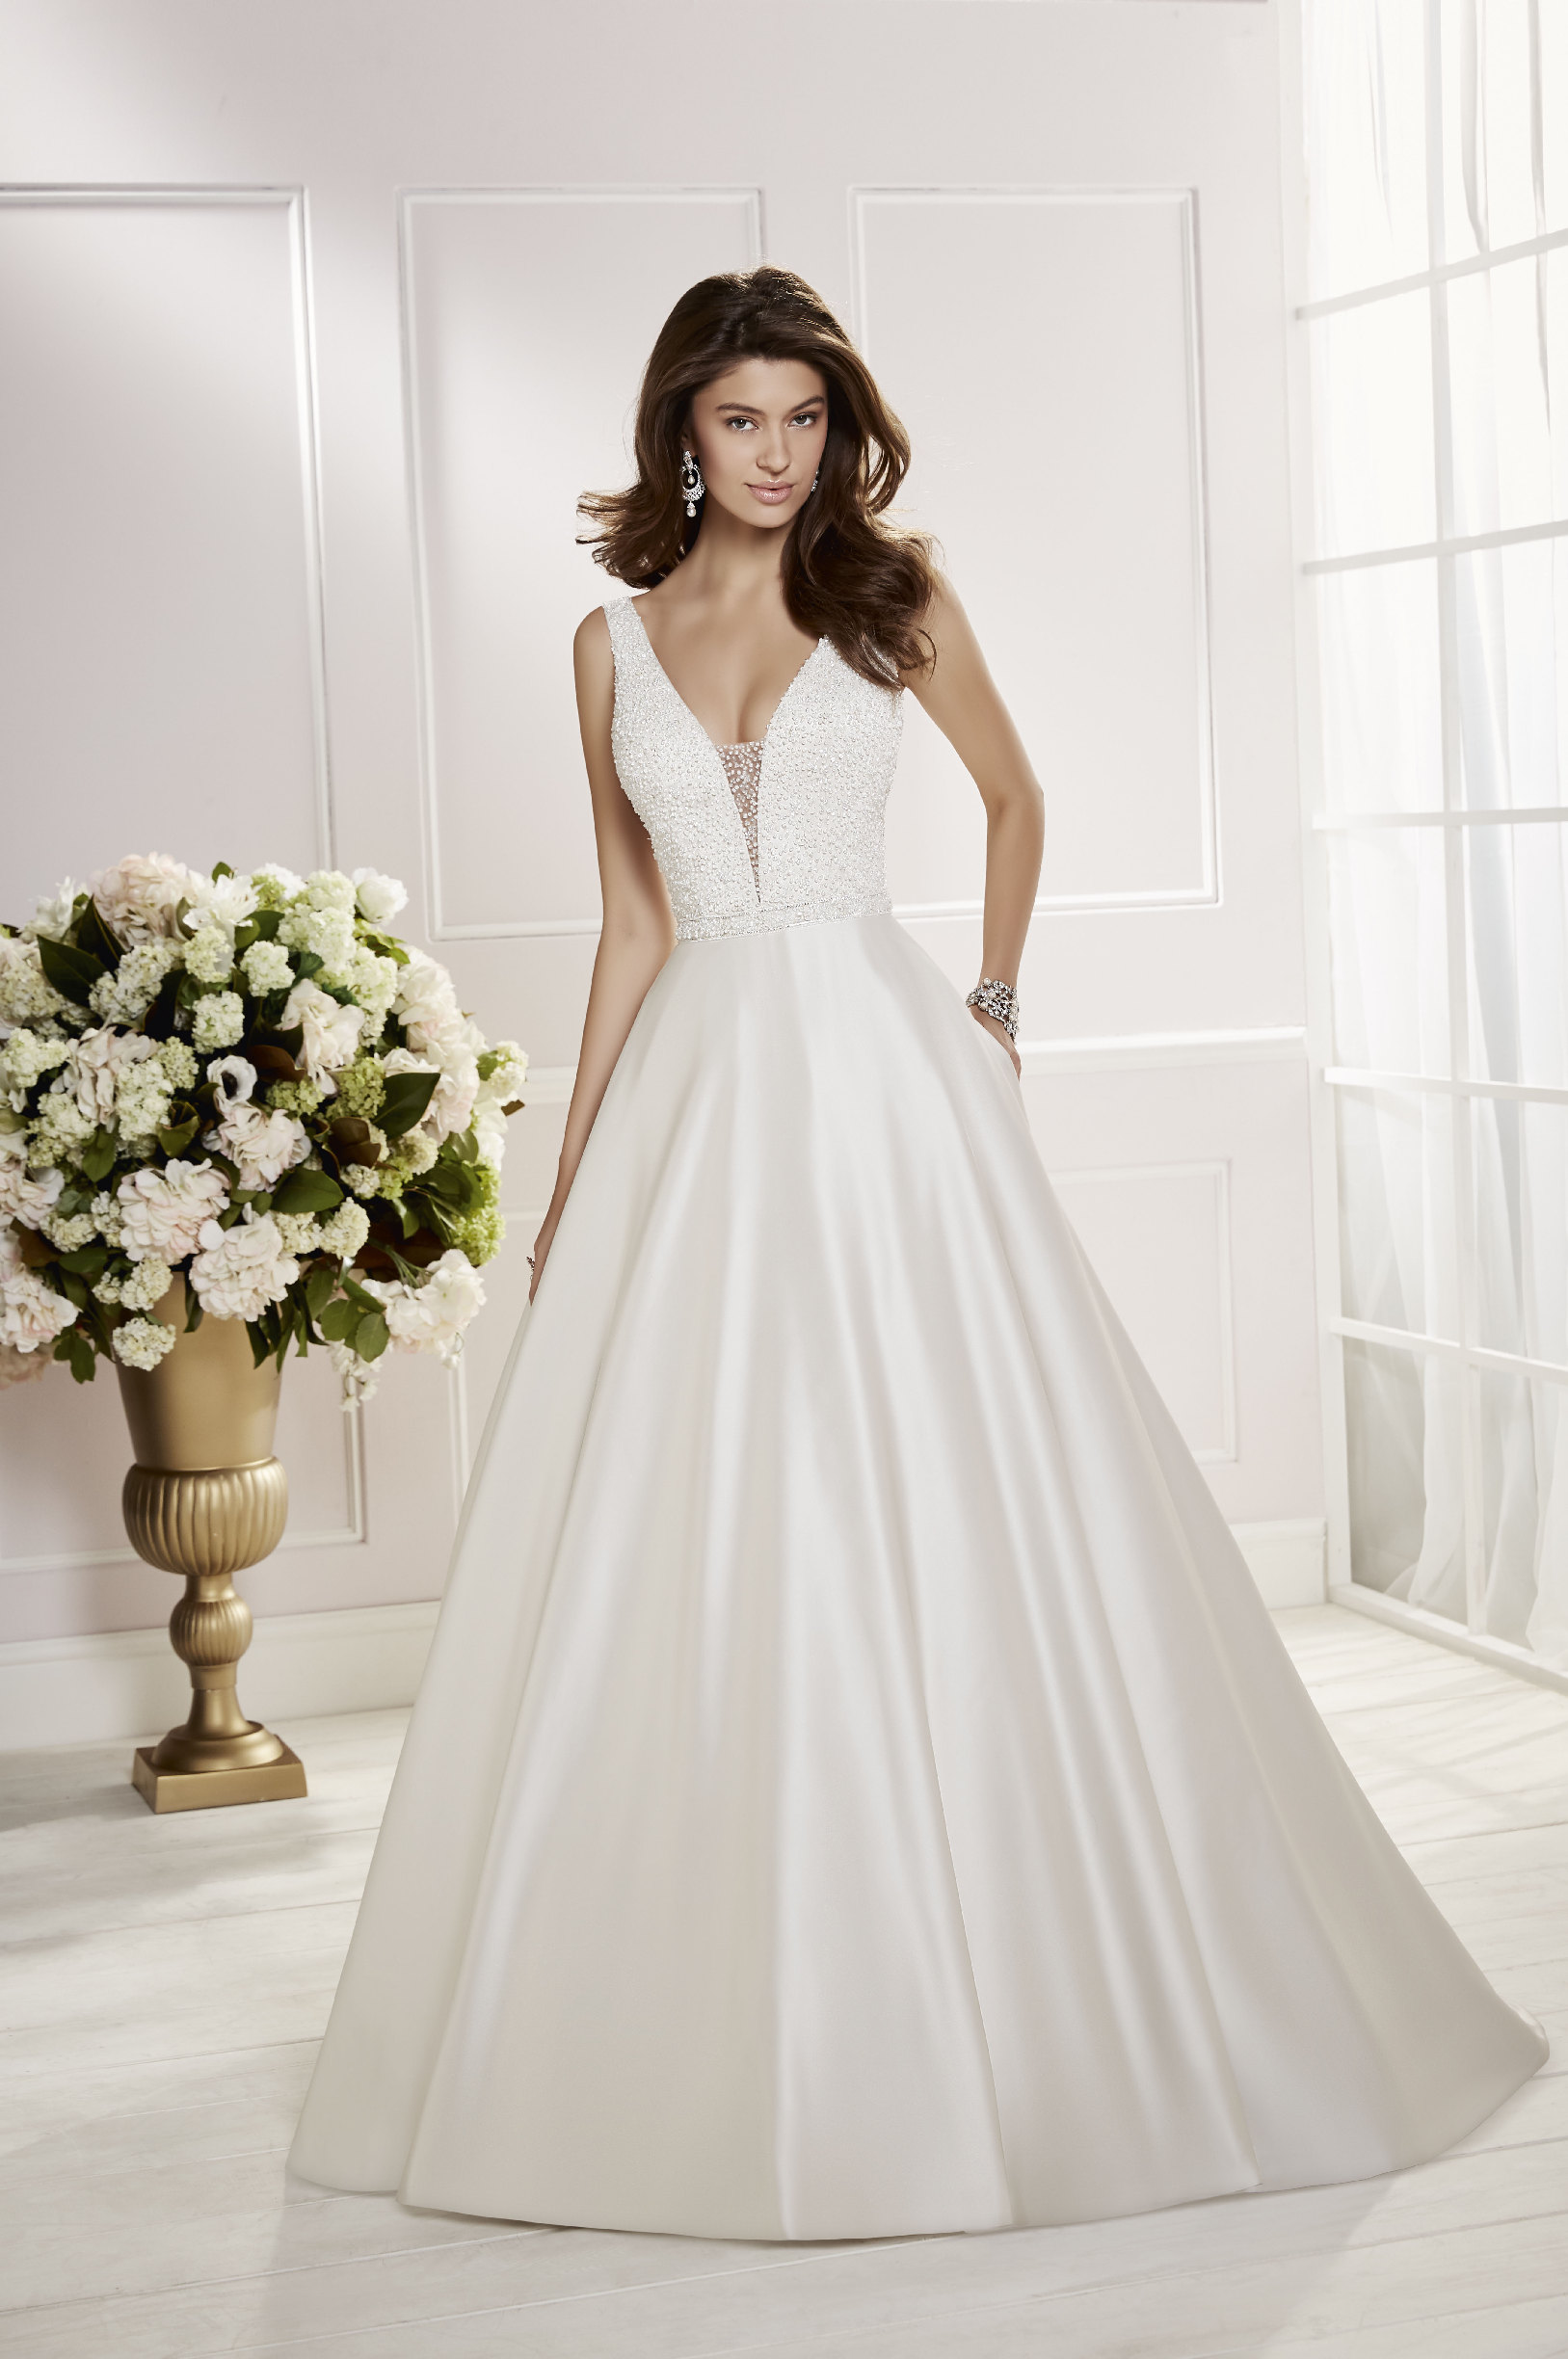 Model wearing Ronald Joyce wedding dress style Cora, 69466, an on-trend ballgown wedding dress with a beaded bodice and contrasting satin skirt  